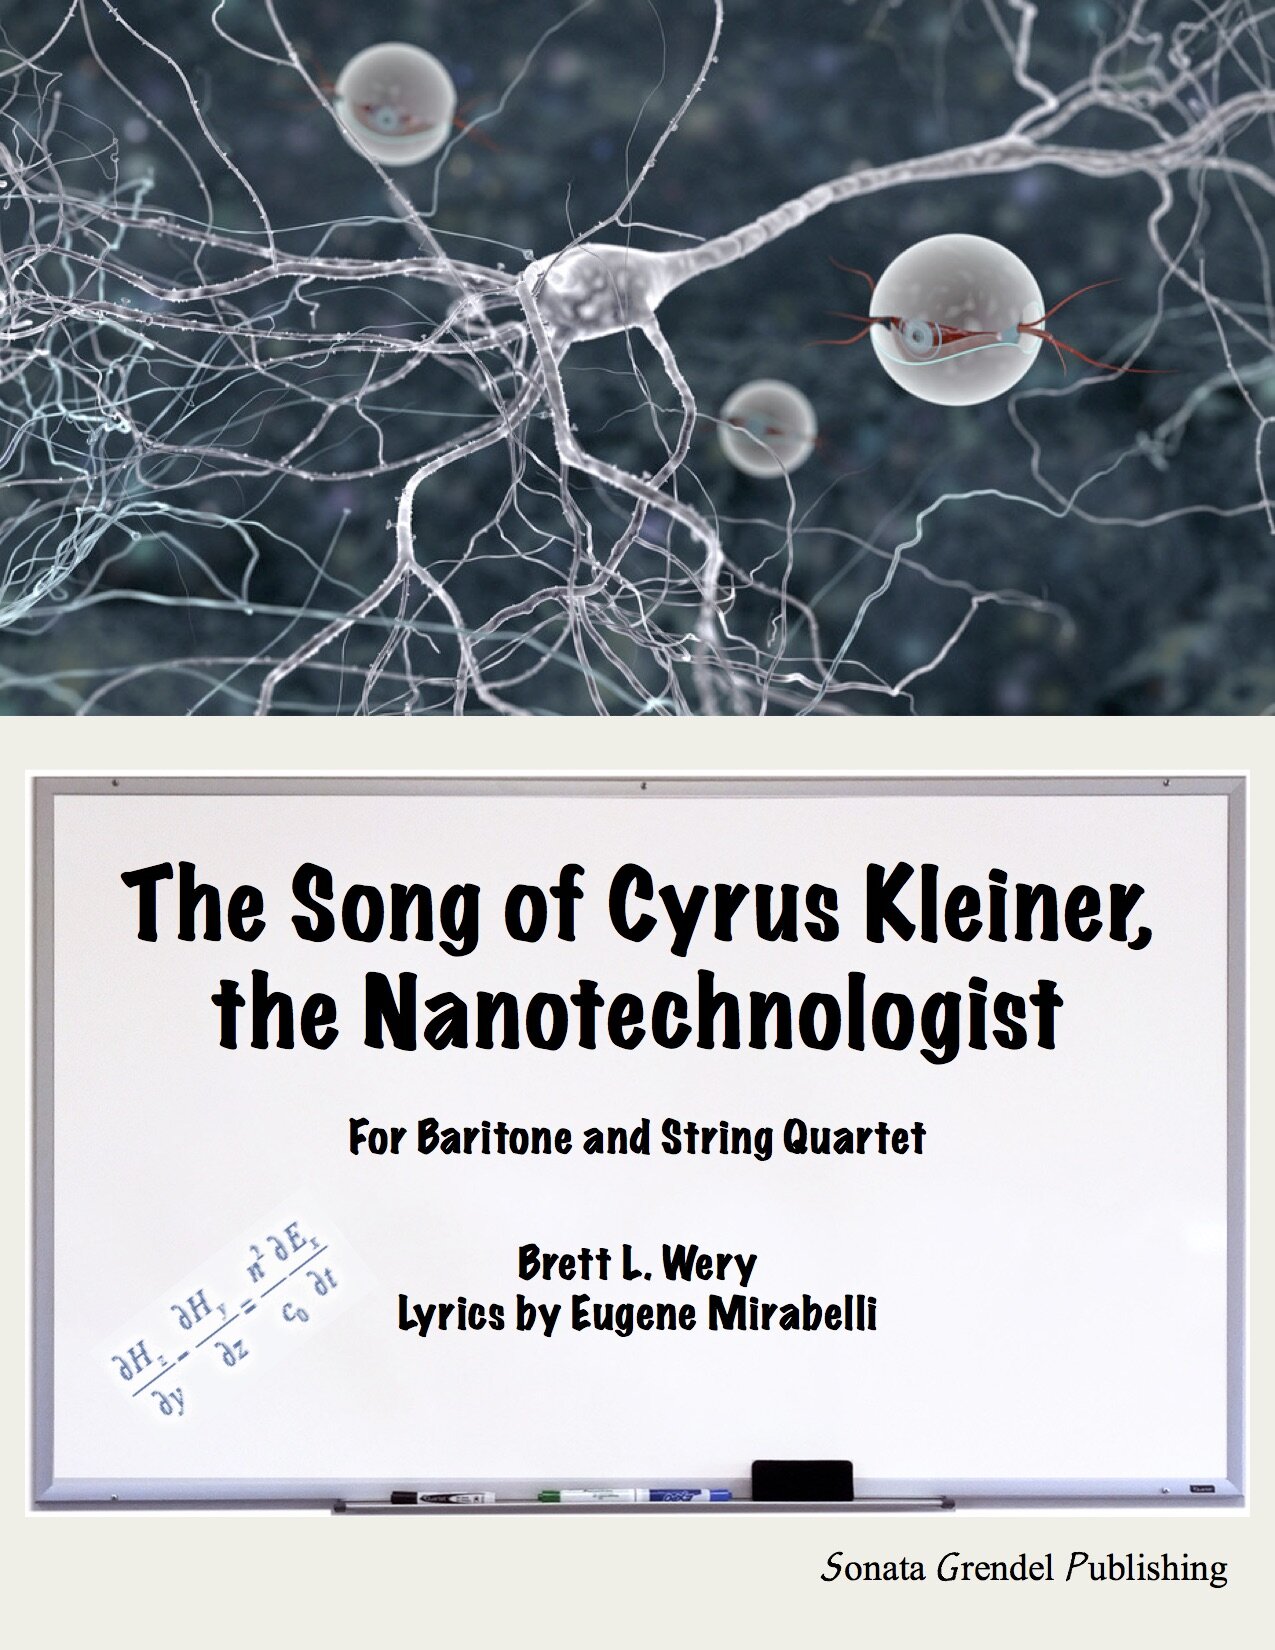 The Song of Cyrus Kleiner, the Nanotechnologist